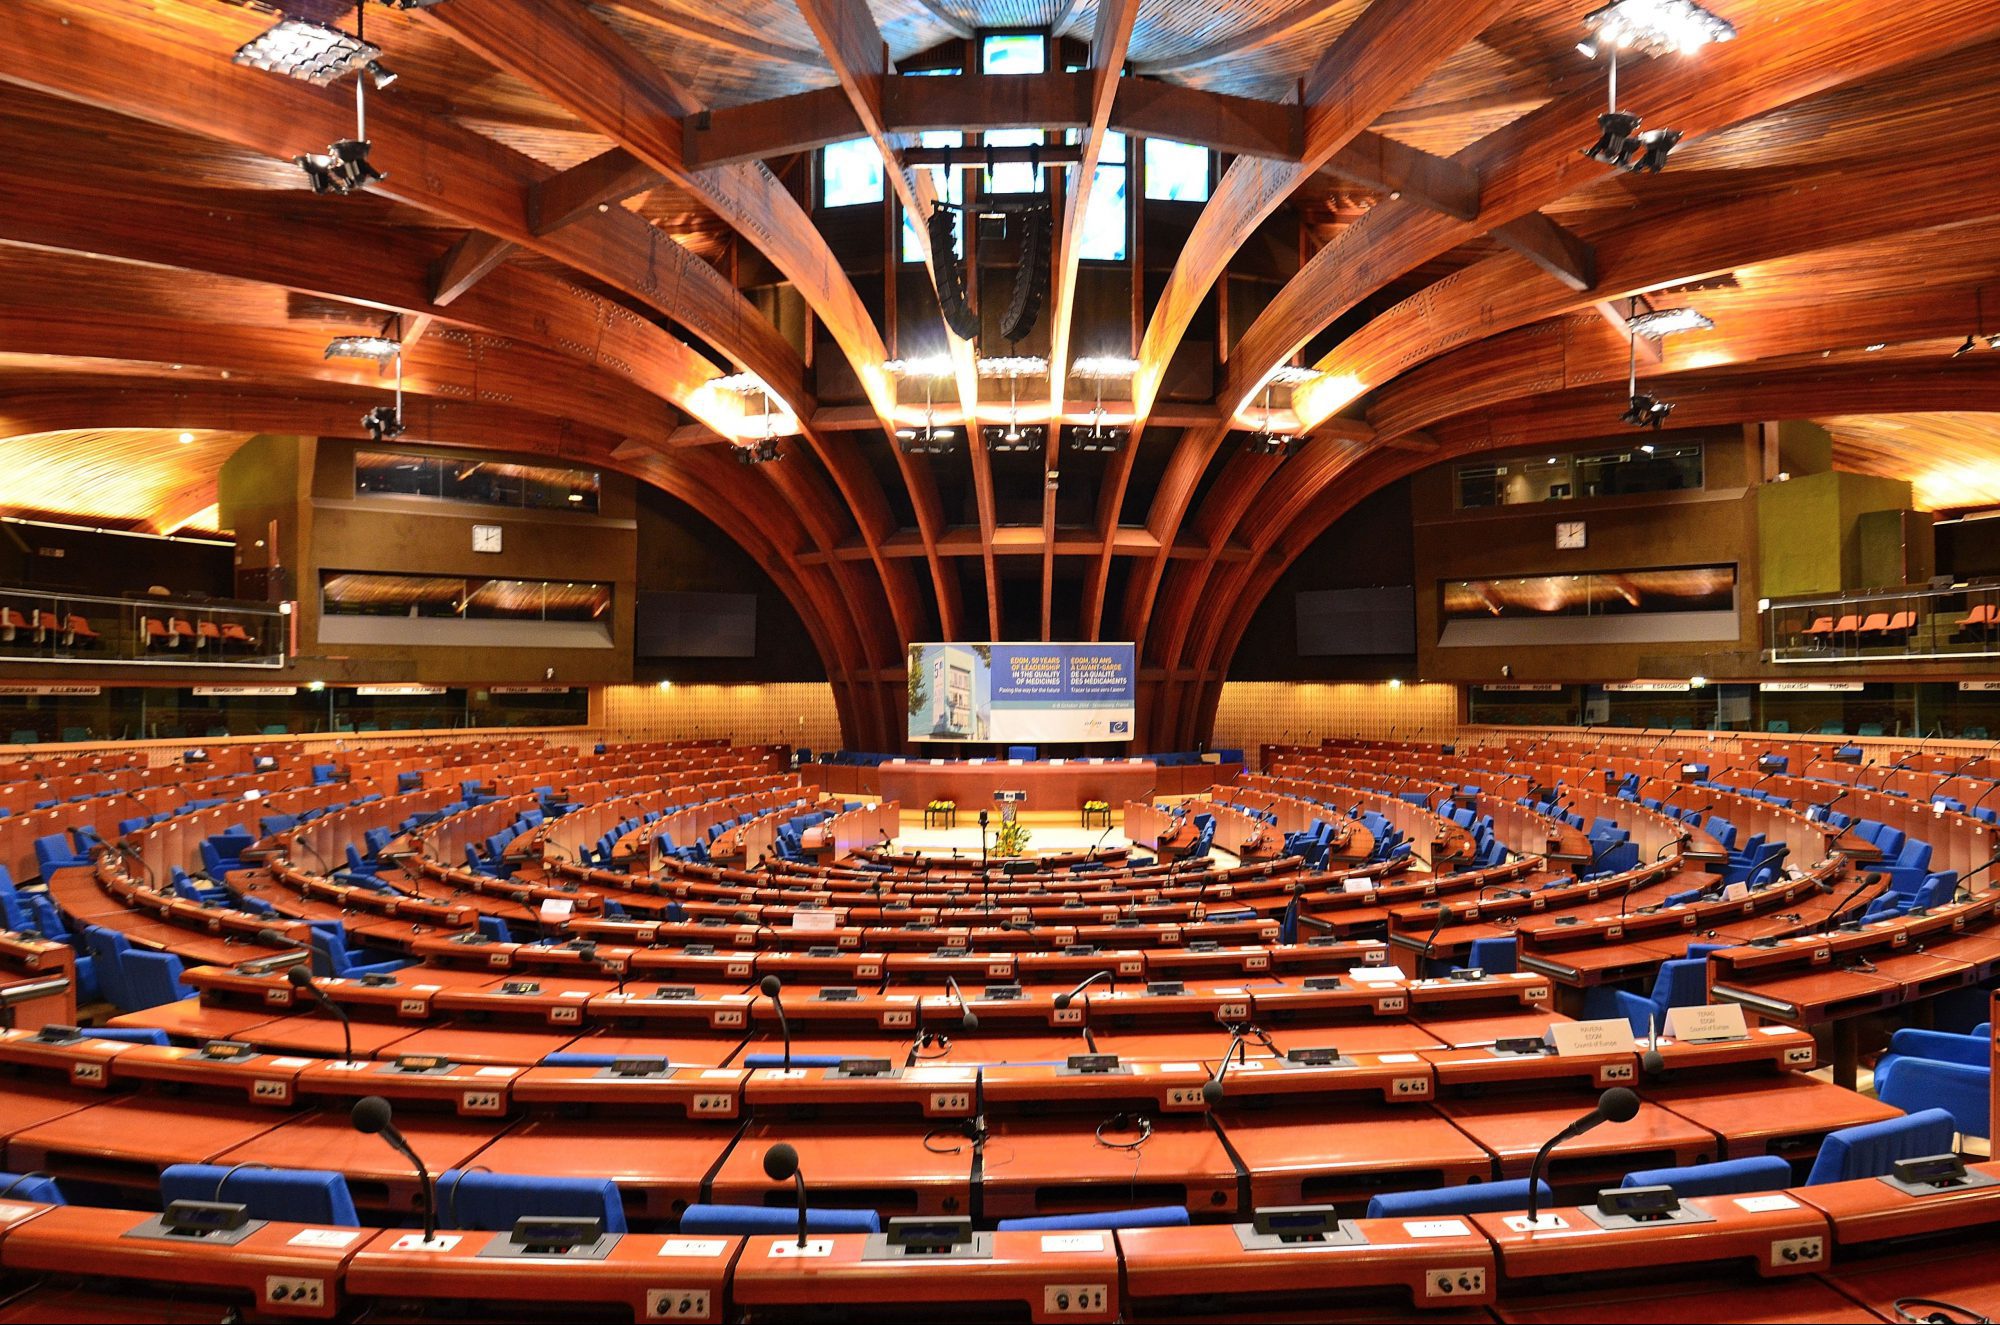 Plenary_chamber_of_the_Council_of_Europe's_Palace_of_Europe_2014_01